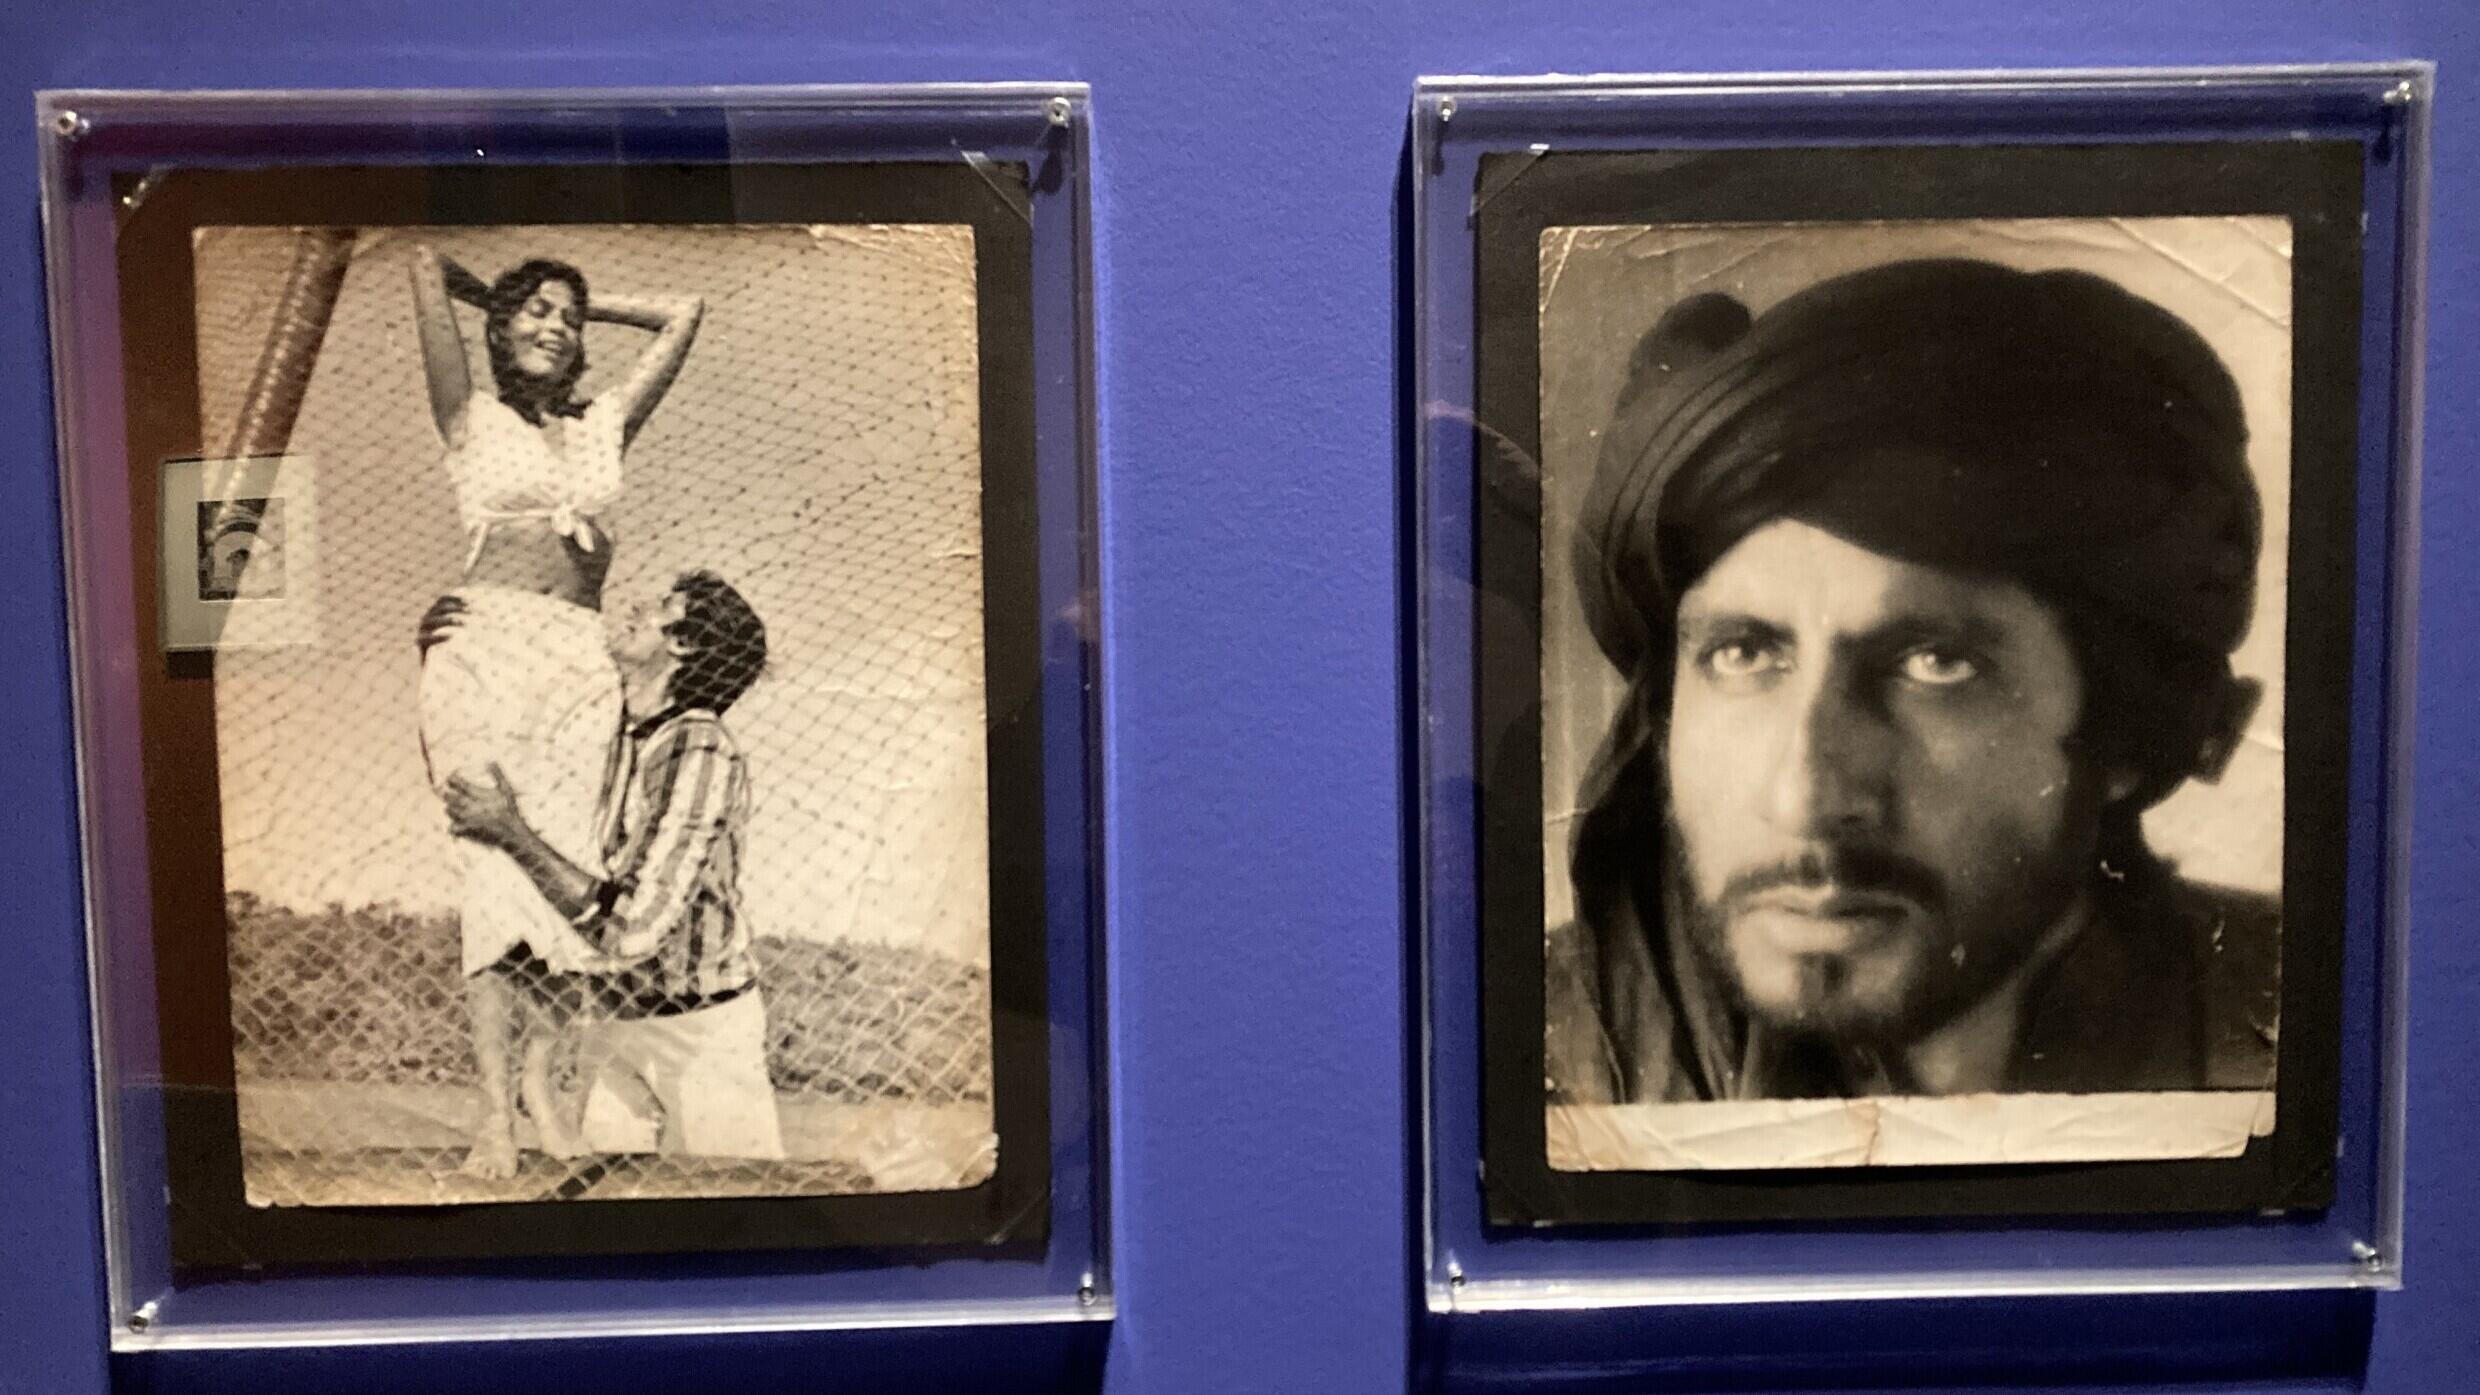 Bolly 5: Amitabh Bachchan, the hero of modernity in Indian cinema, in the “Bollywood Superstars” exhibition at the Quai Branly museum in Paris.